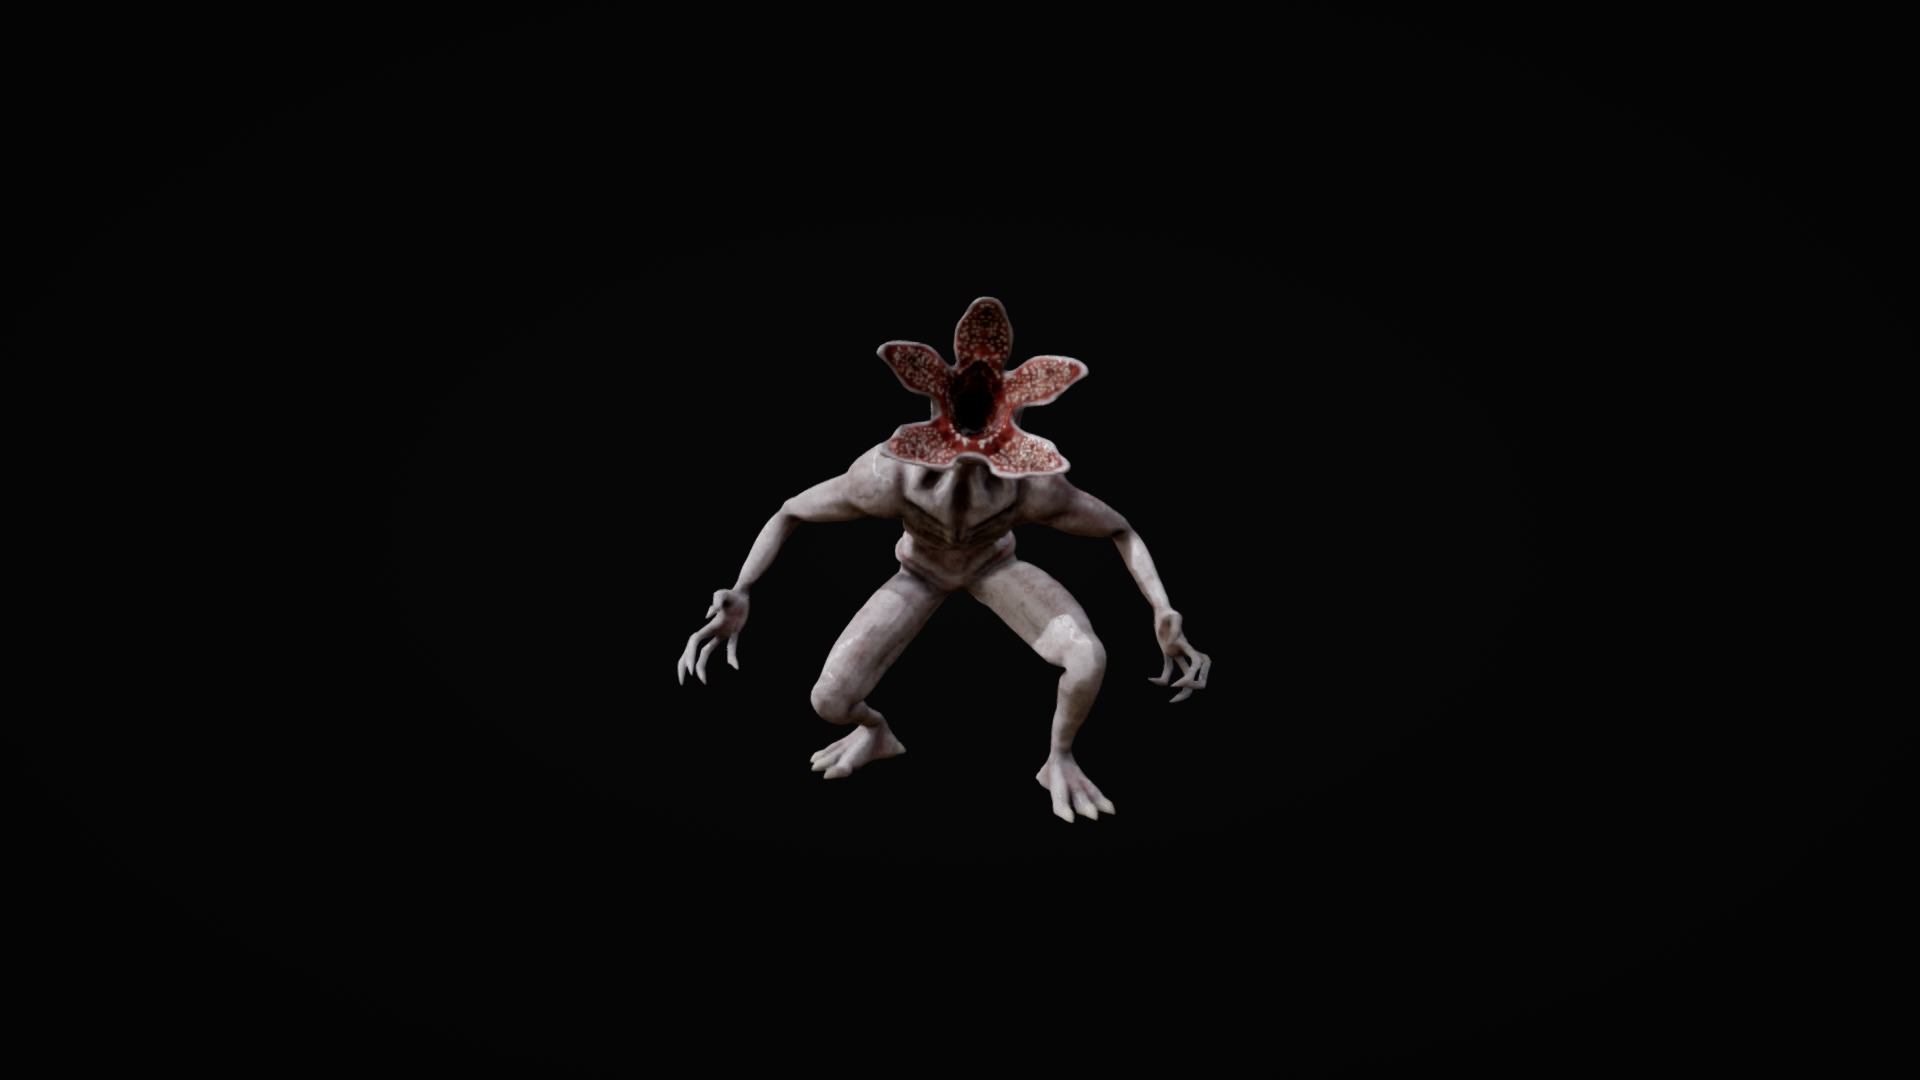 Demogorgon I created in MasterpieceVR. Additional texturing done in Substance Painter 3d model